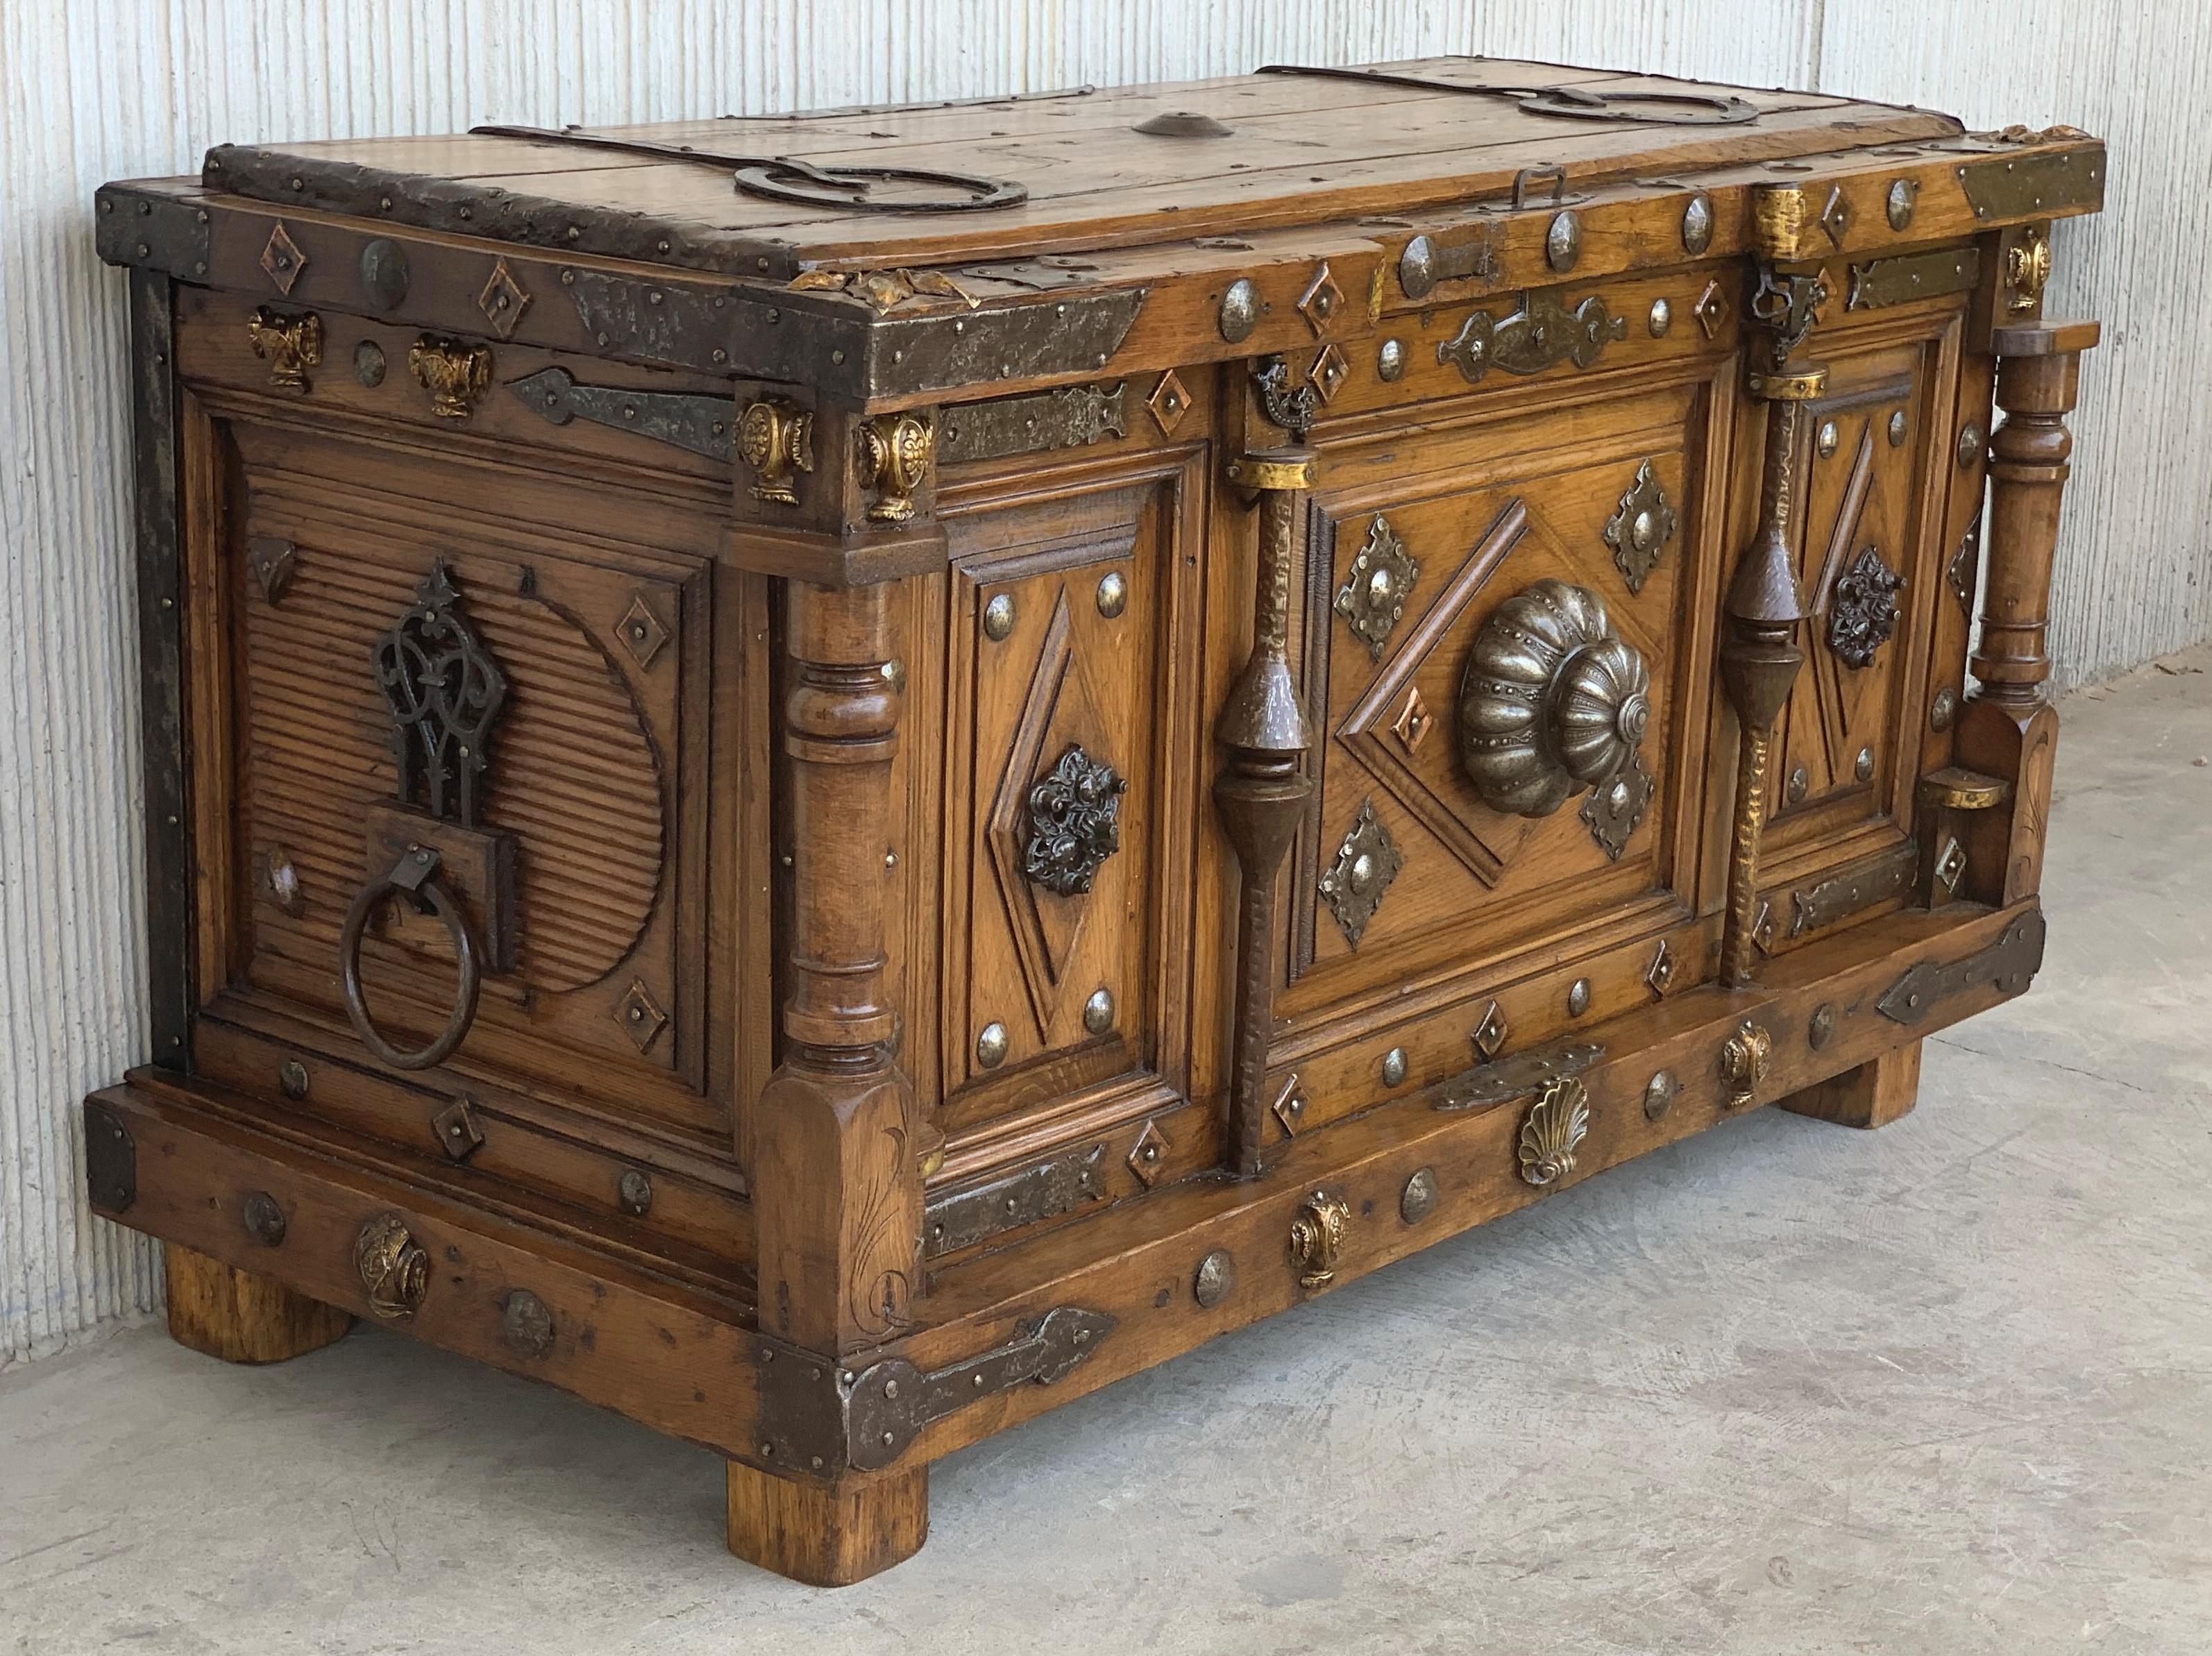 Store blankets or other bedding in this beautiful antique walnut trunk. Crafted in Castilia, Spain, circa 1880, this blanket chest makes a visual statement no matter the room it is in. The top cabinet is embellished with bronze decorations and